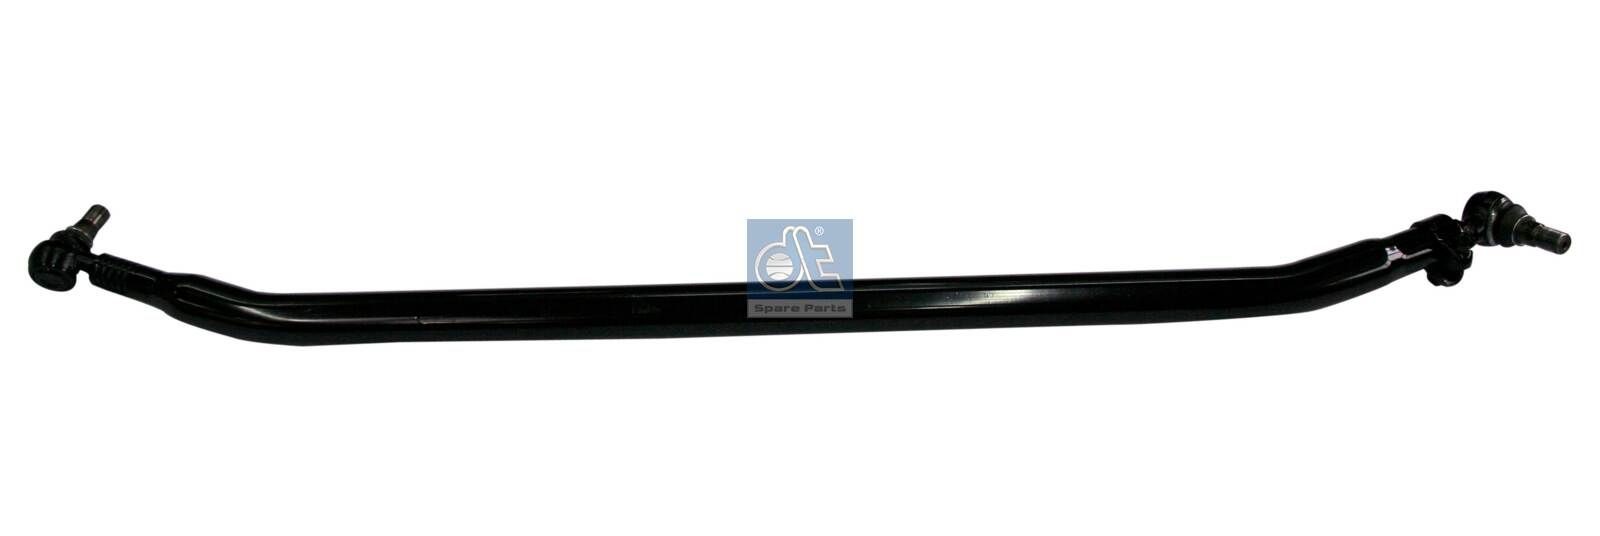 DT Spare Parts 4.62872 Rod Assembly A945 330 0003